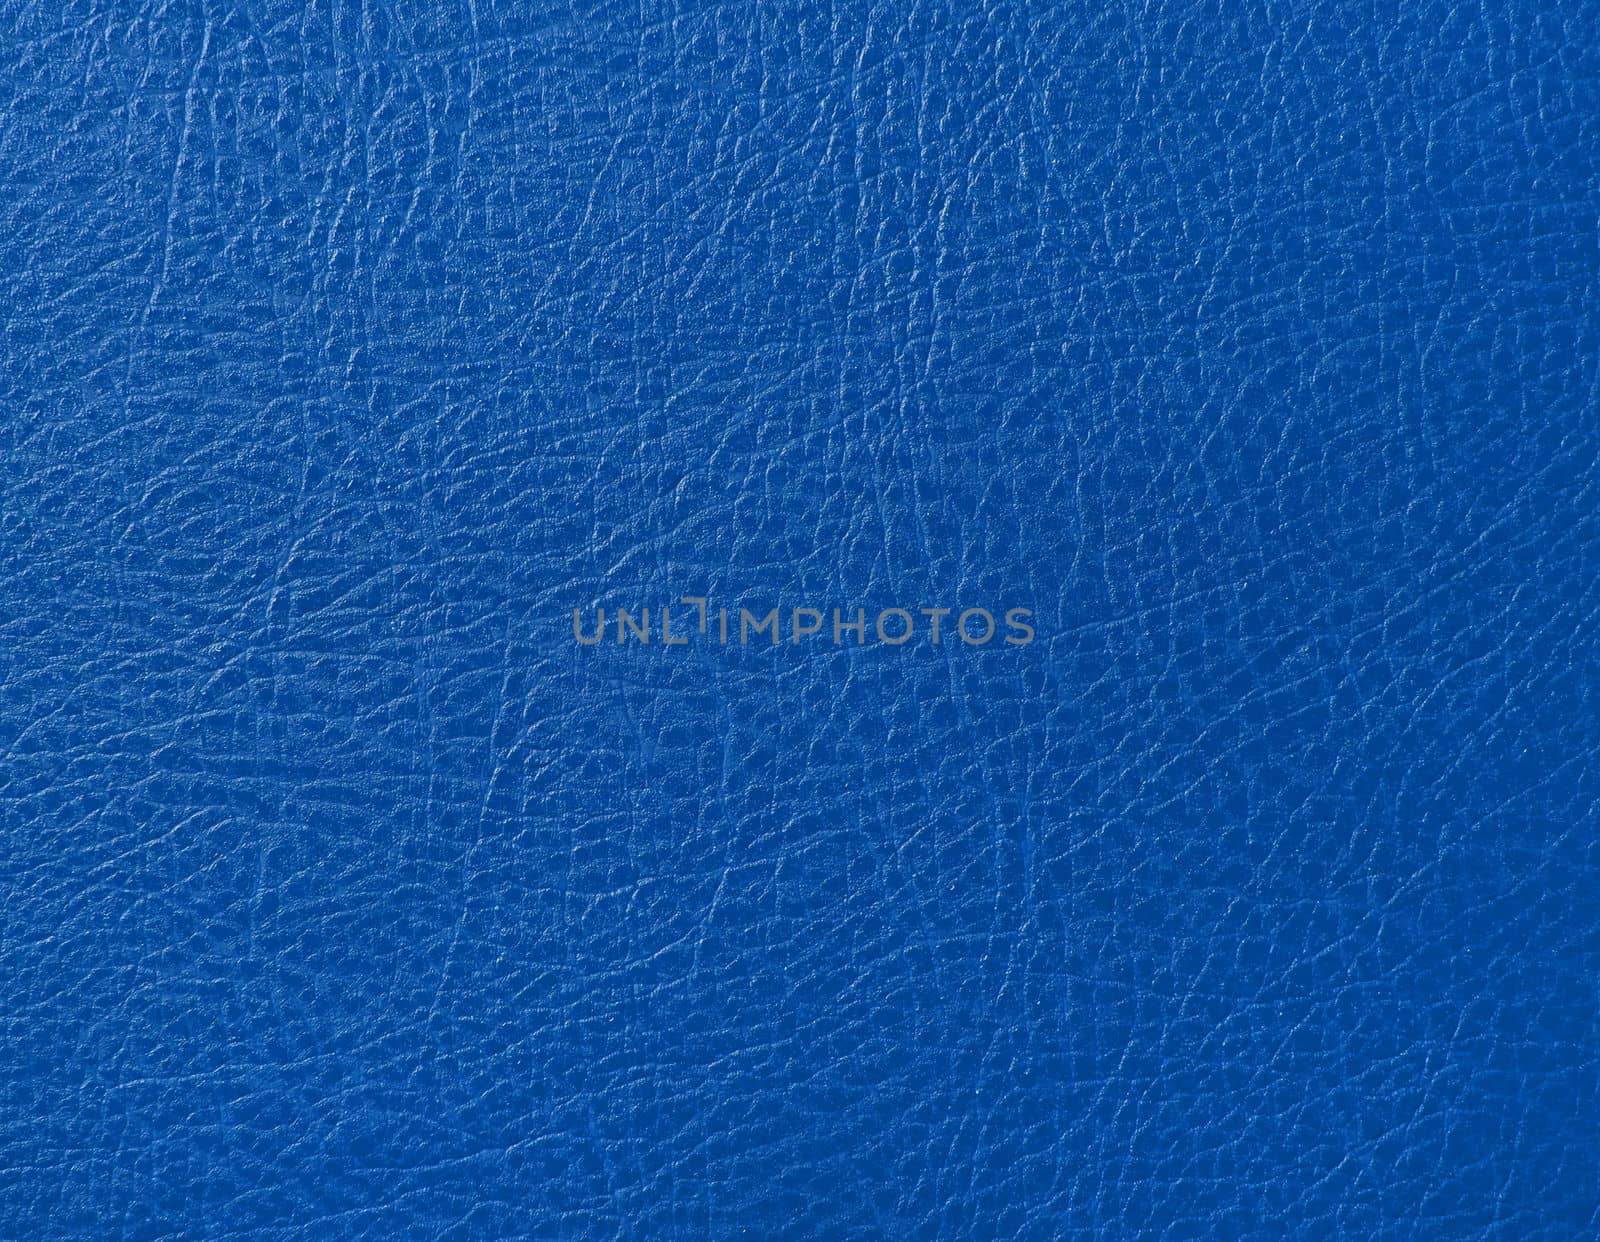 Close up background texture pattern of blue natural leather grain, directly above